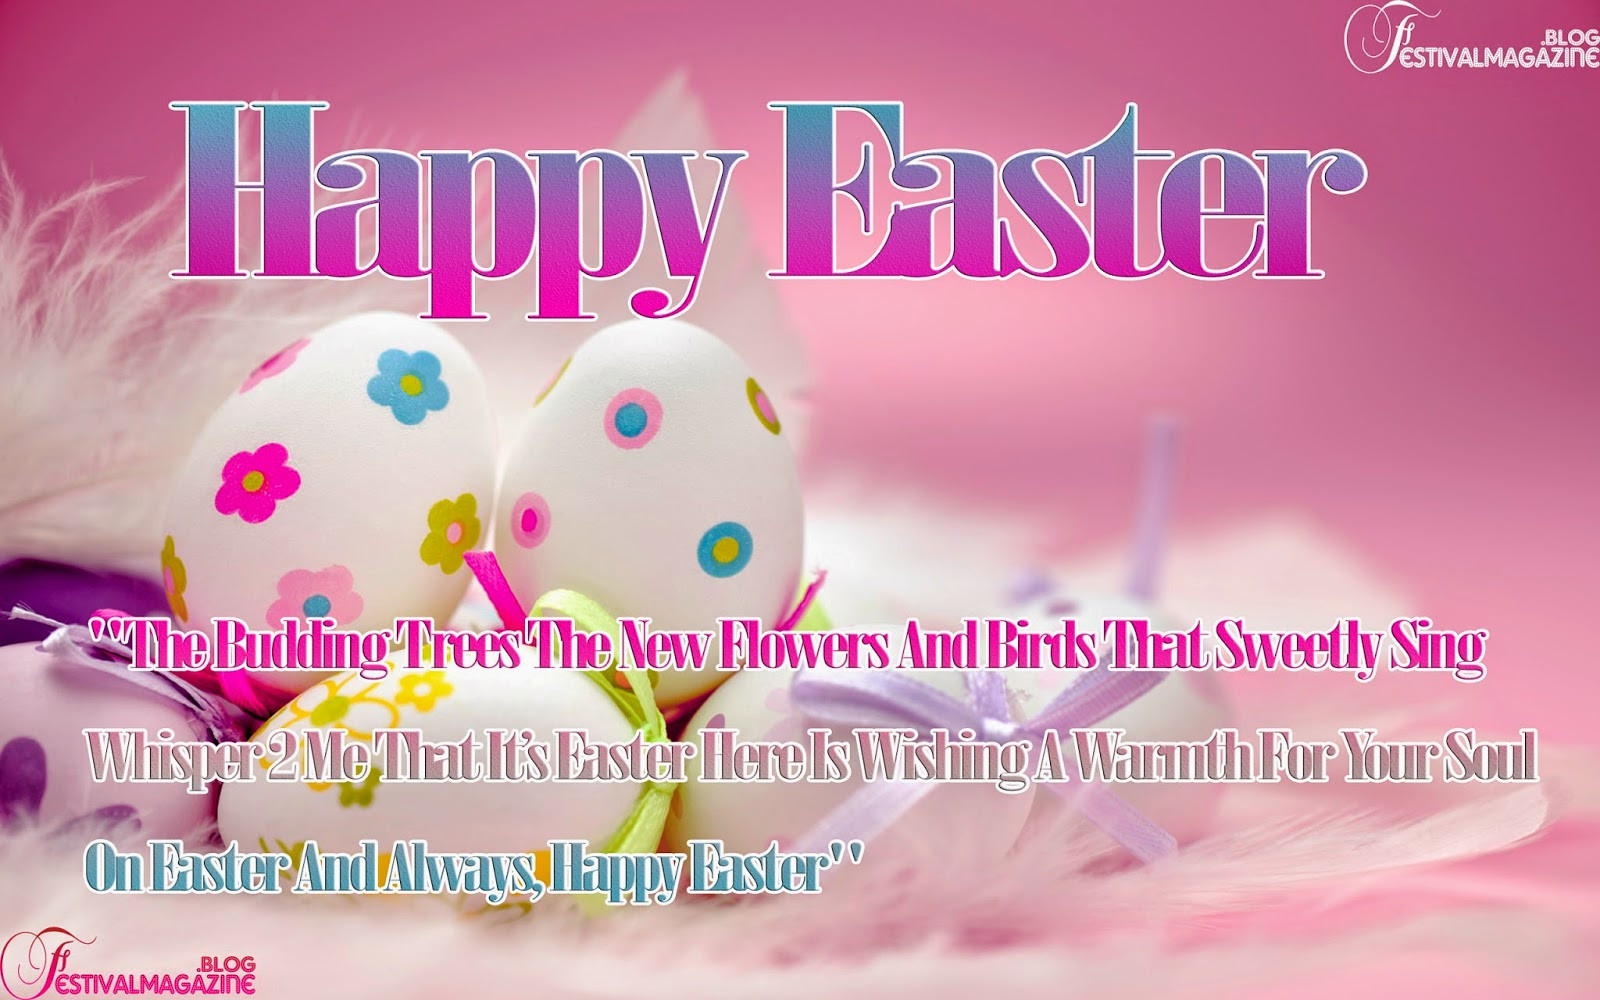 Quotes For Easter Wishes
 Festival Magazine Happy Easter Day Wallpapers With